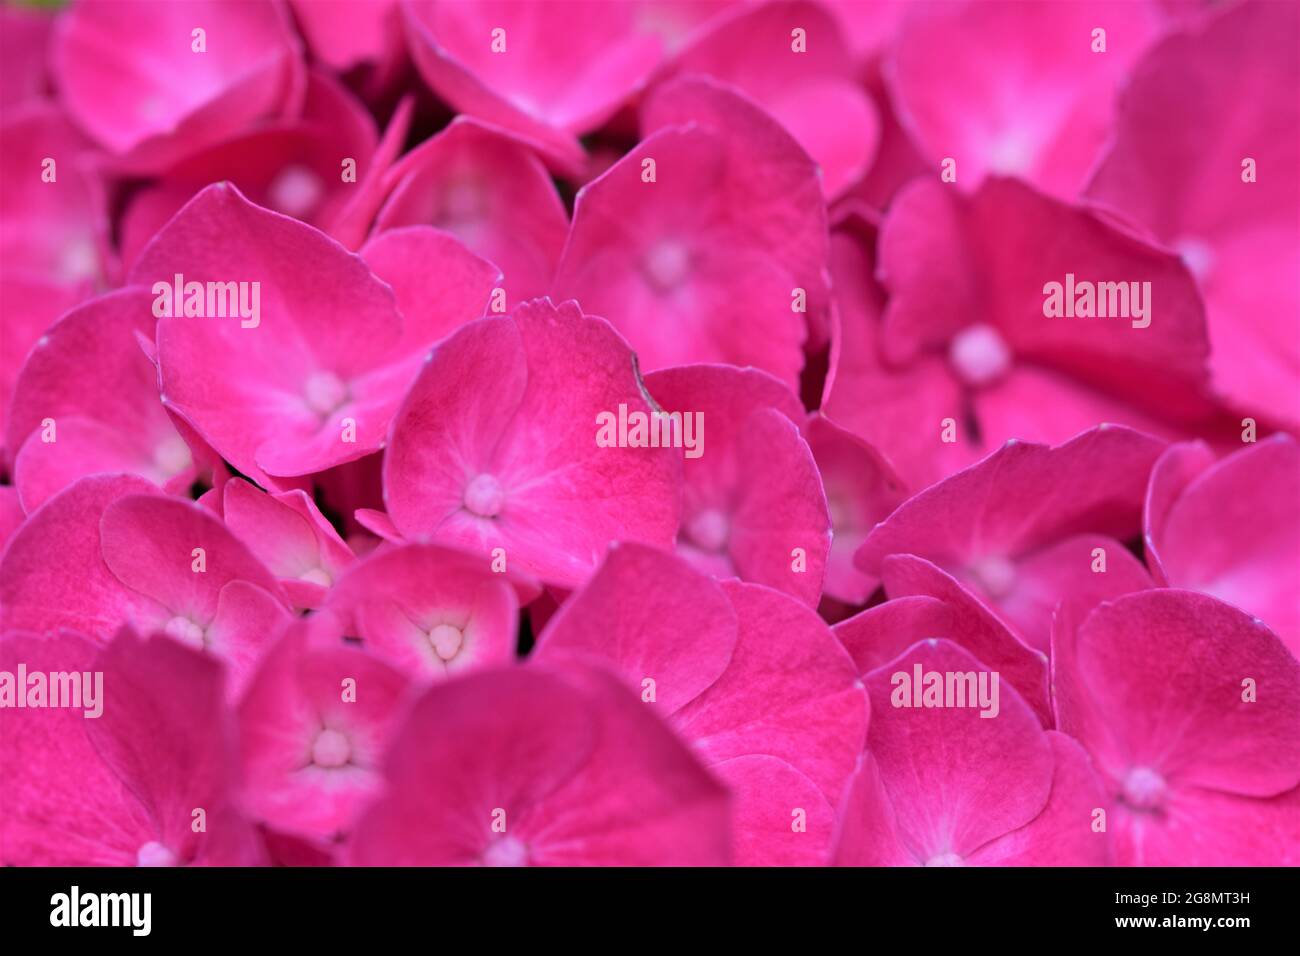 A pink hydrangea blossom as a close up Stock Photo